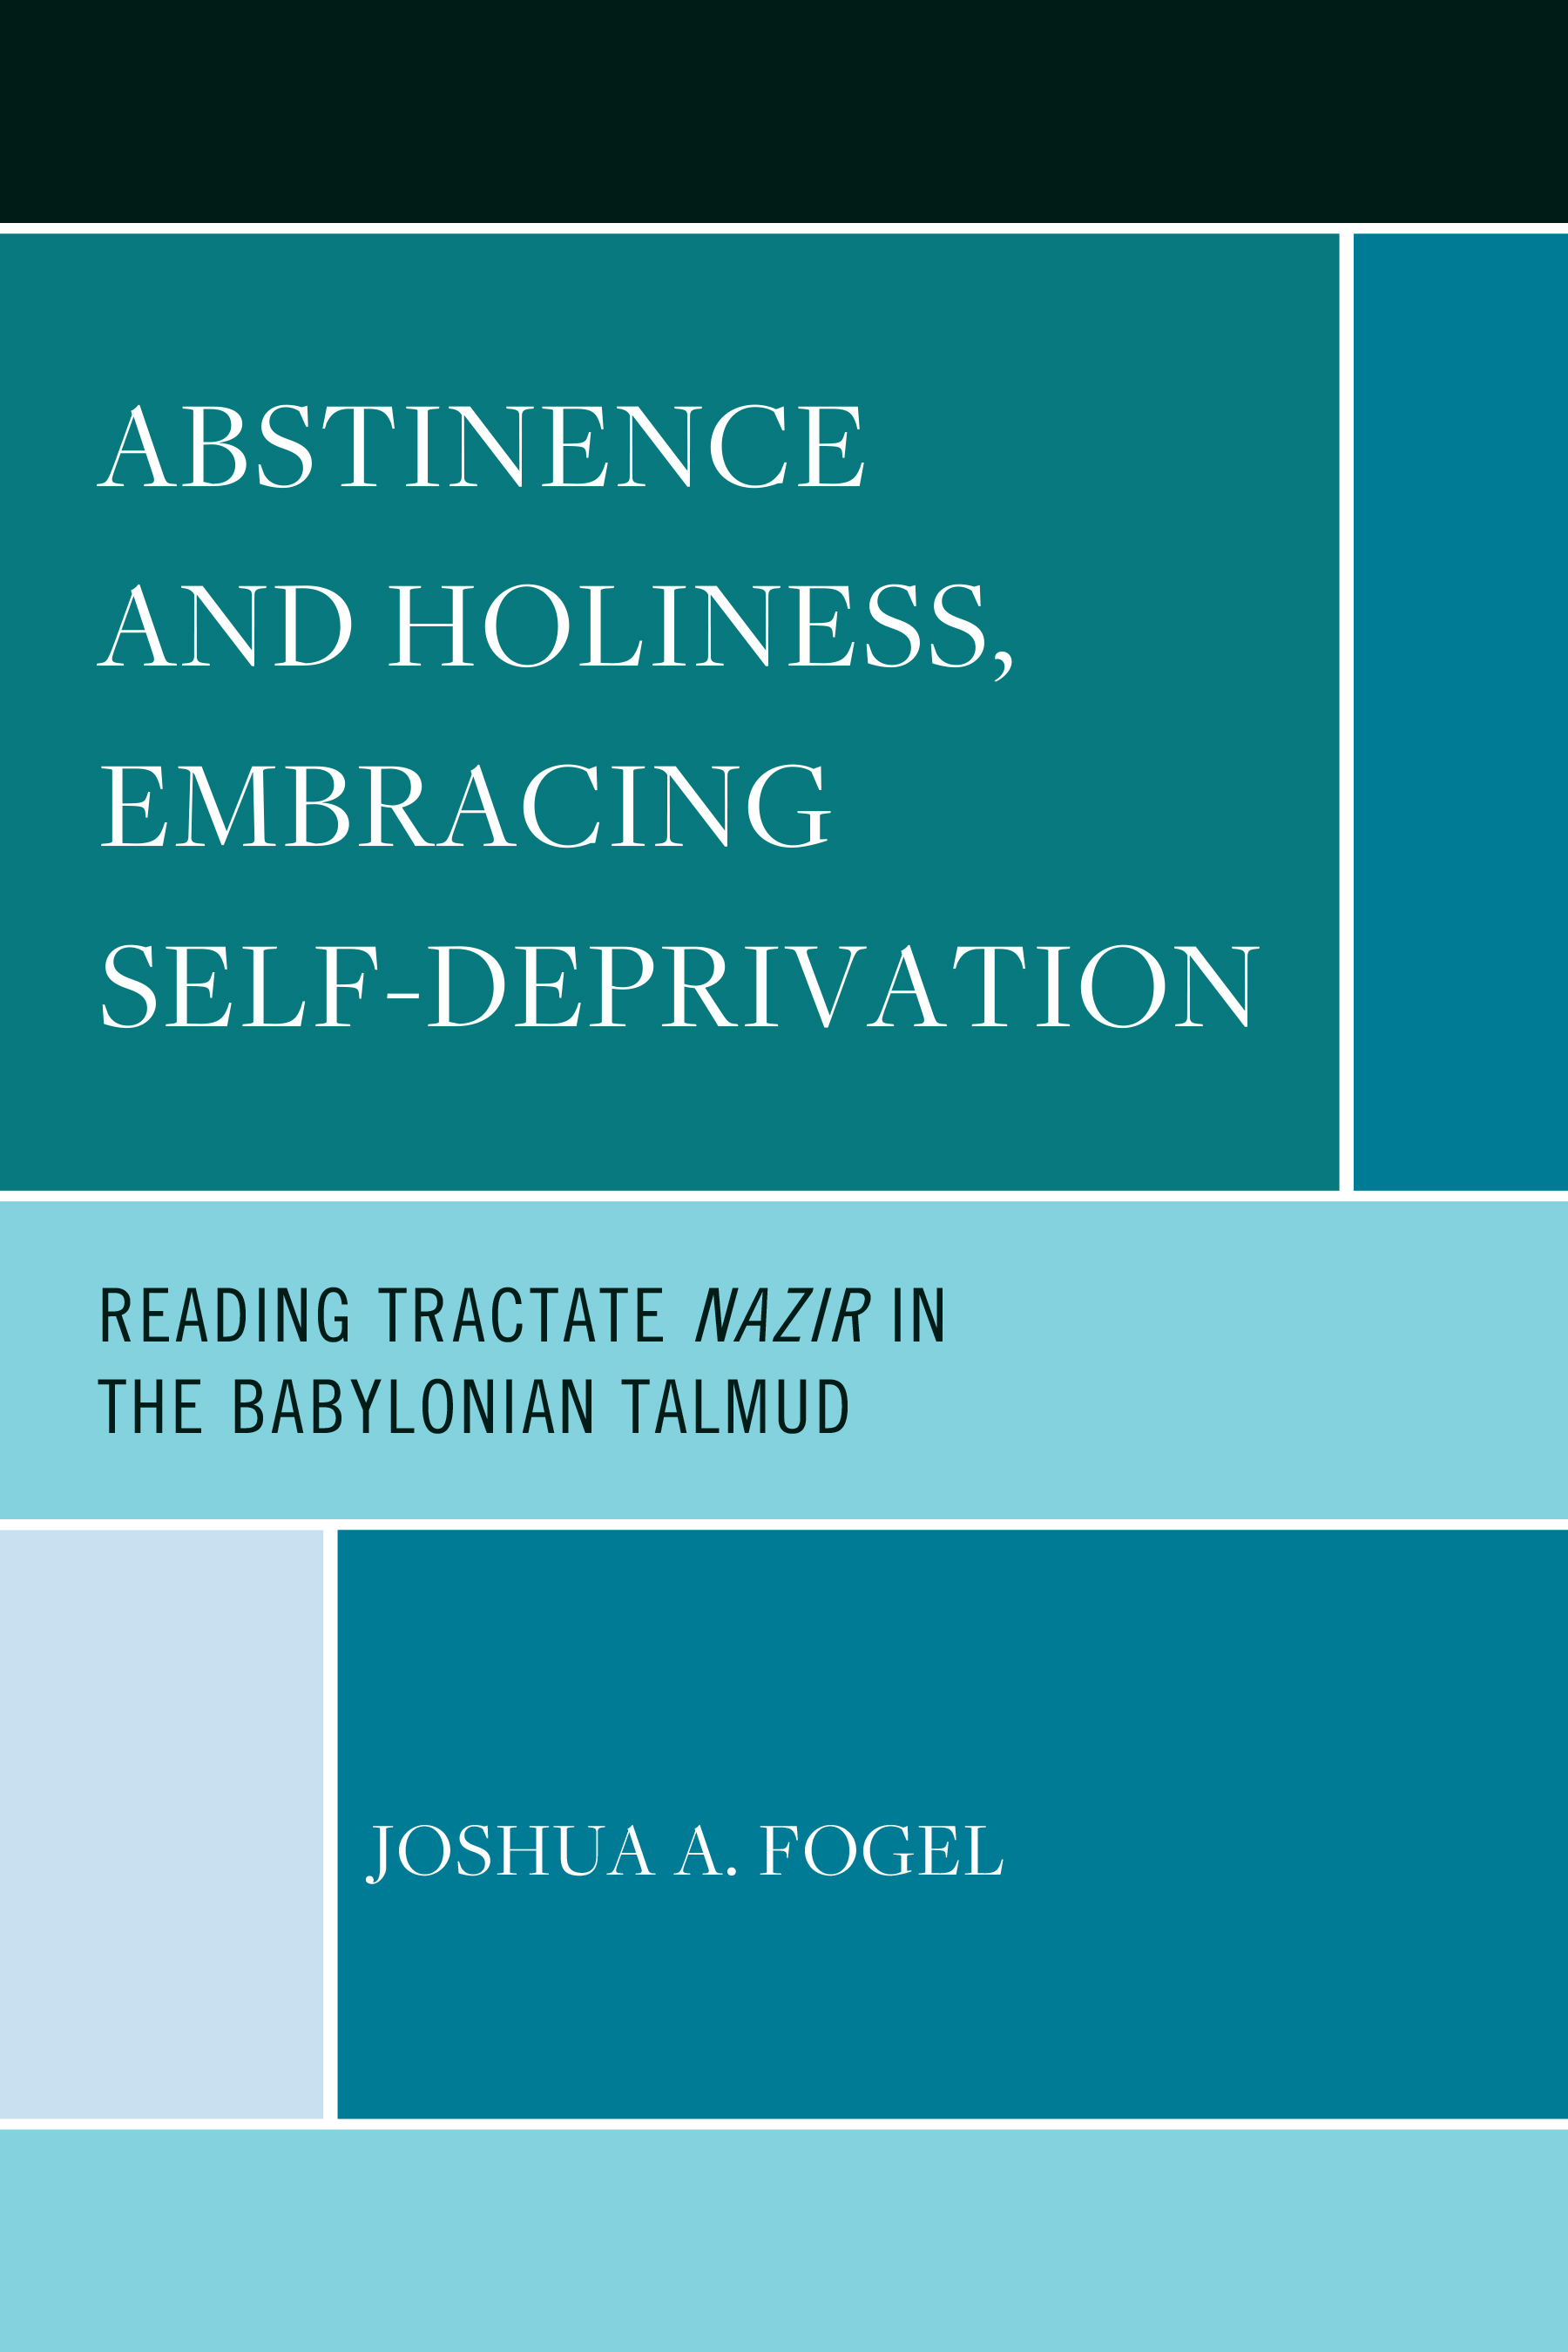 Abstinence and Holiness, Embracing Self-Deprivation: Reading Tractate Nazir in the Babylonian Talmud